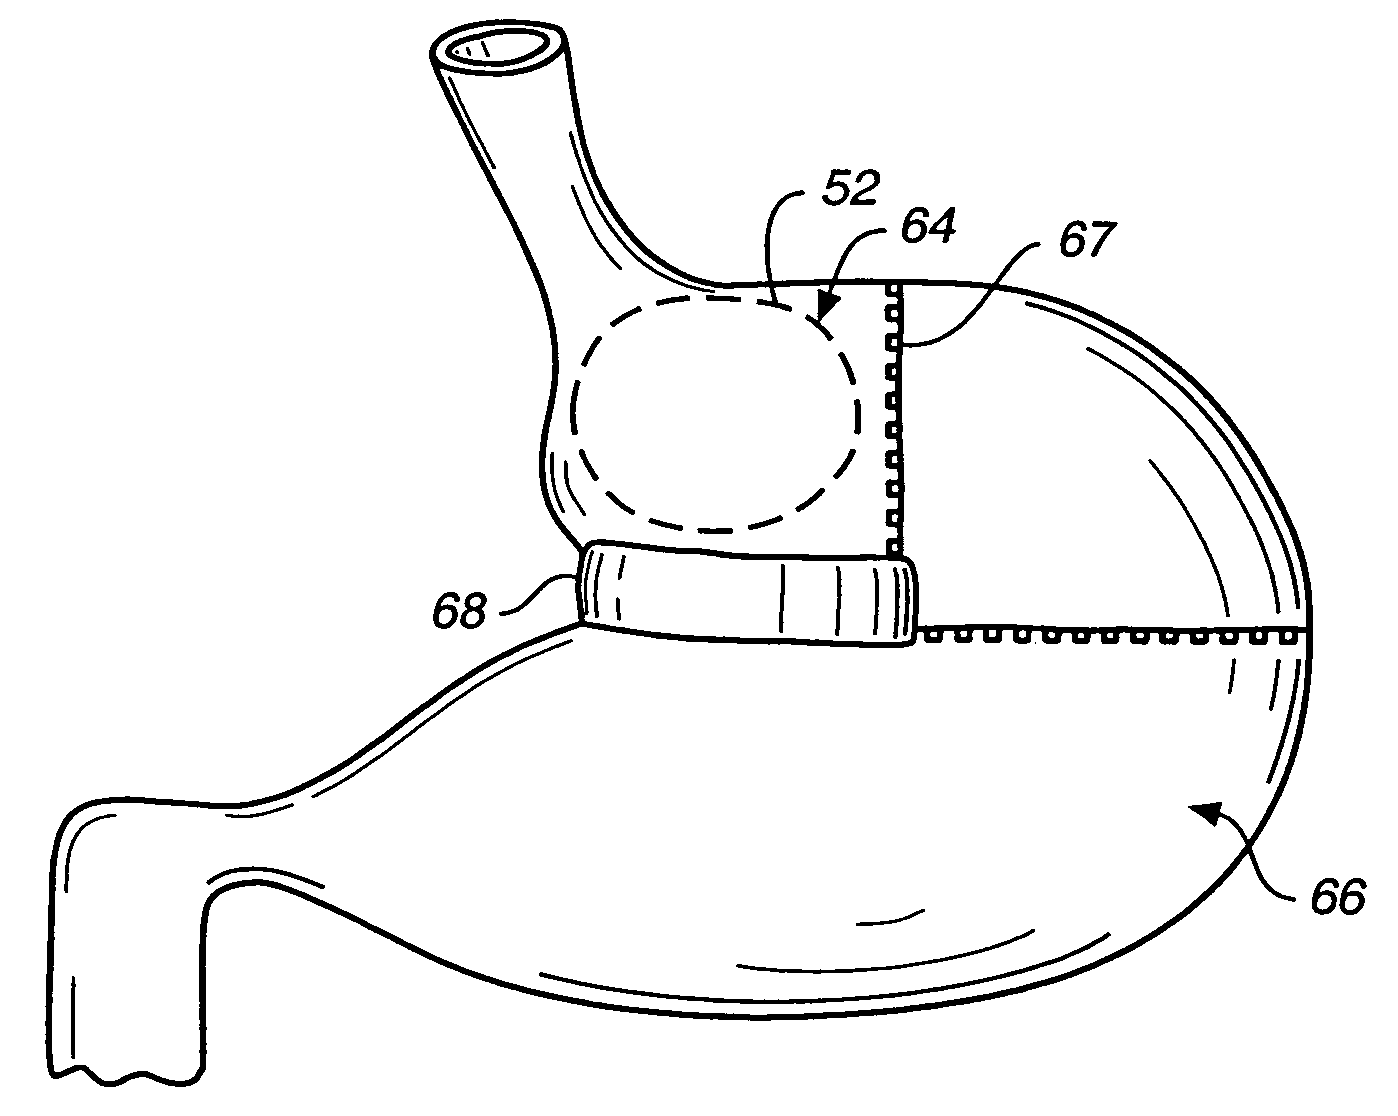 Methods and devices for maintaining a space occupying device in a relatively fixed location within a stomach